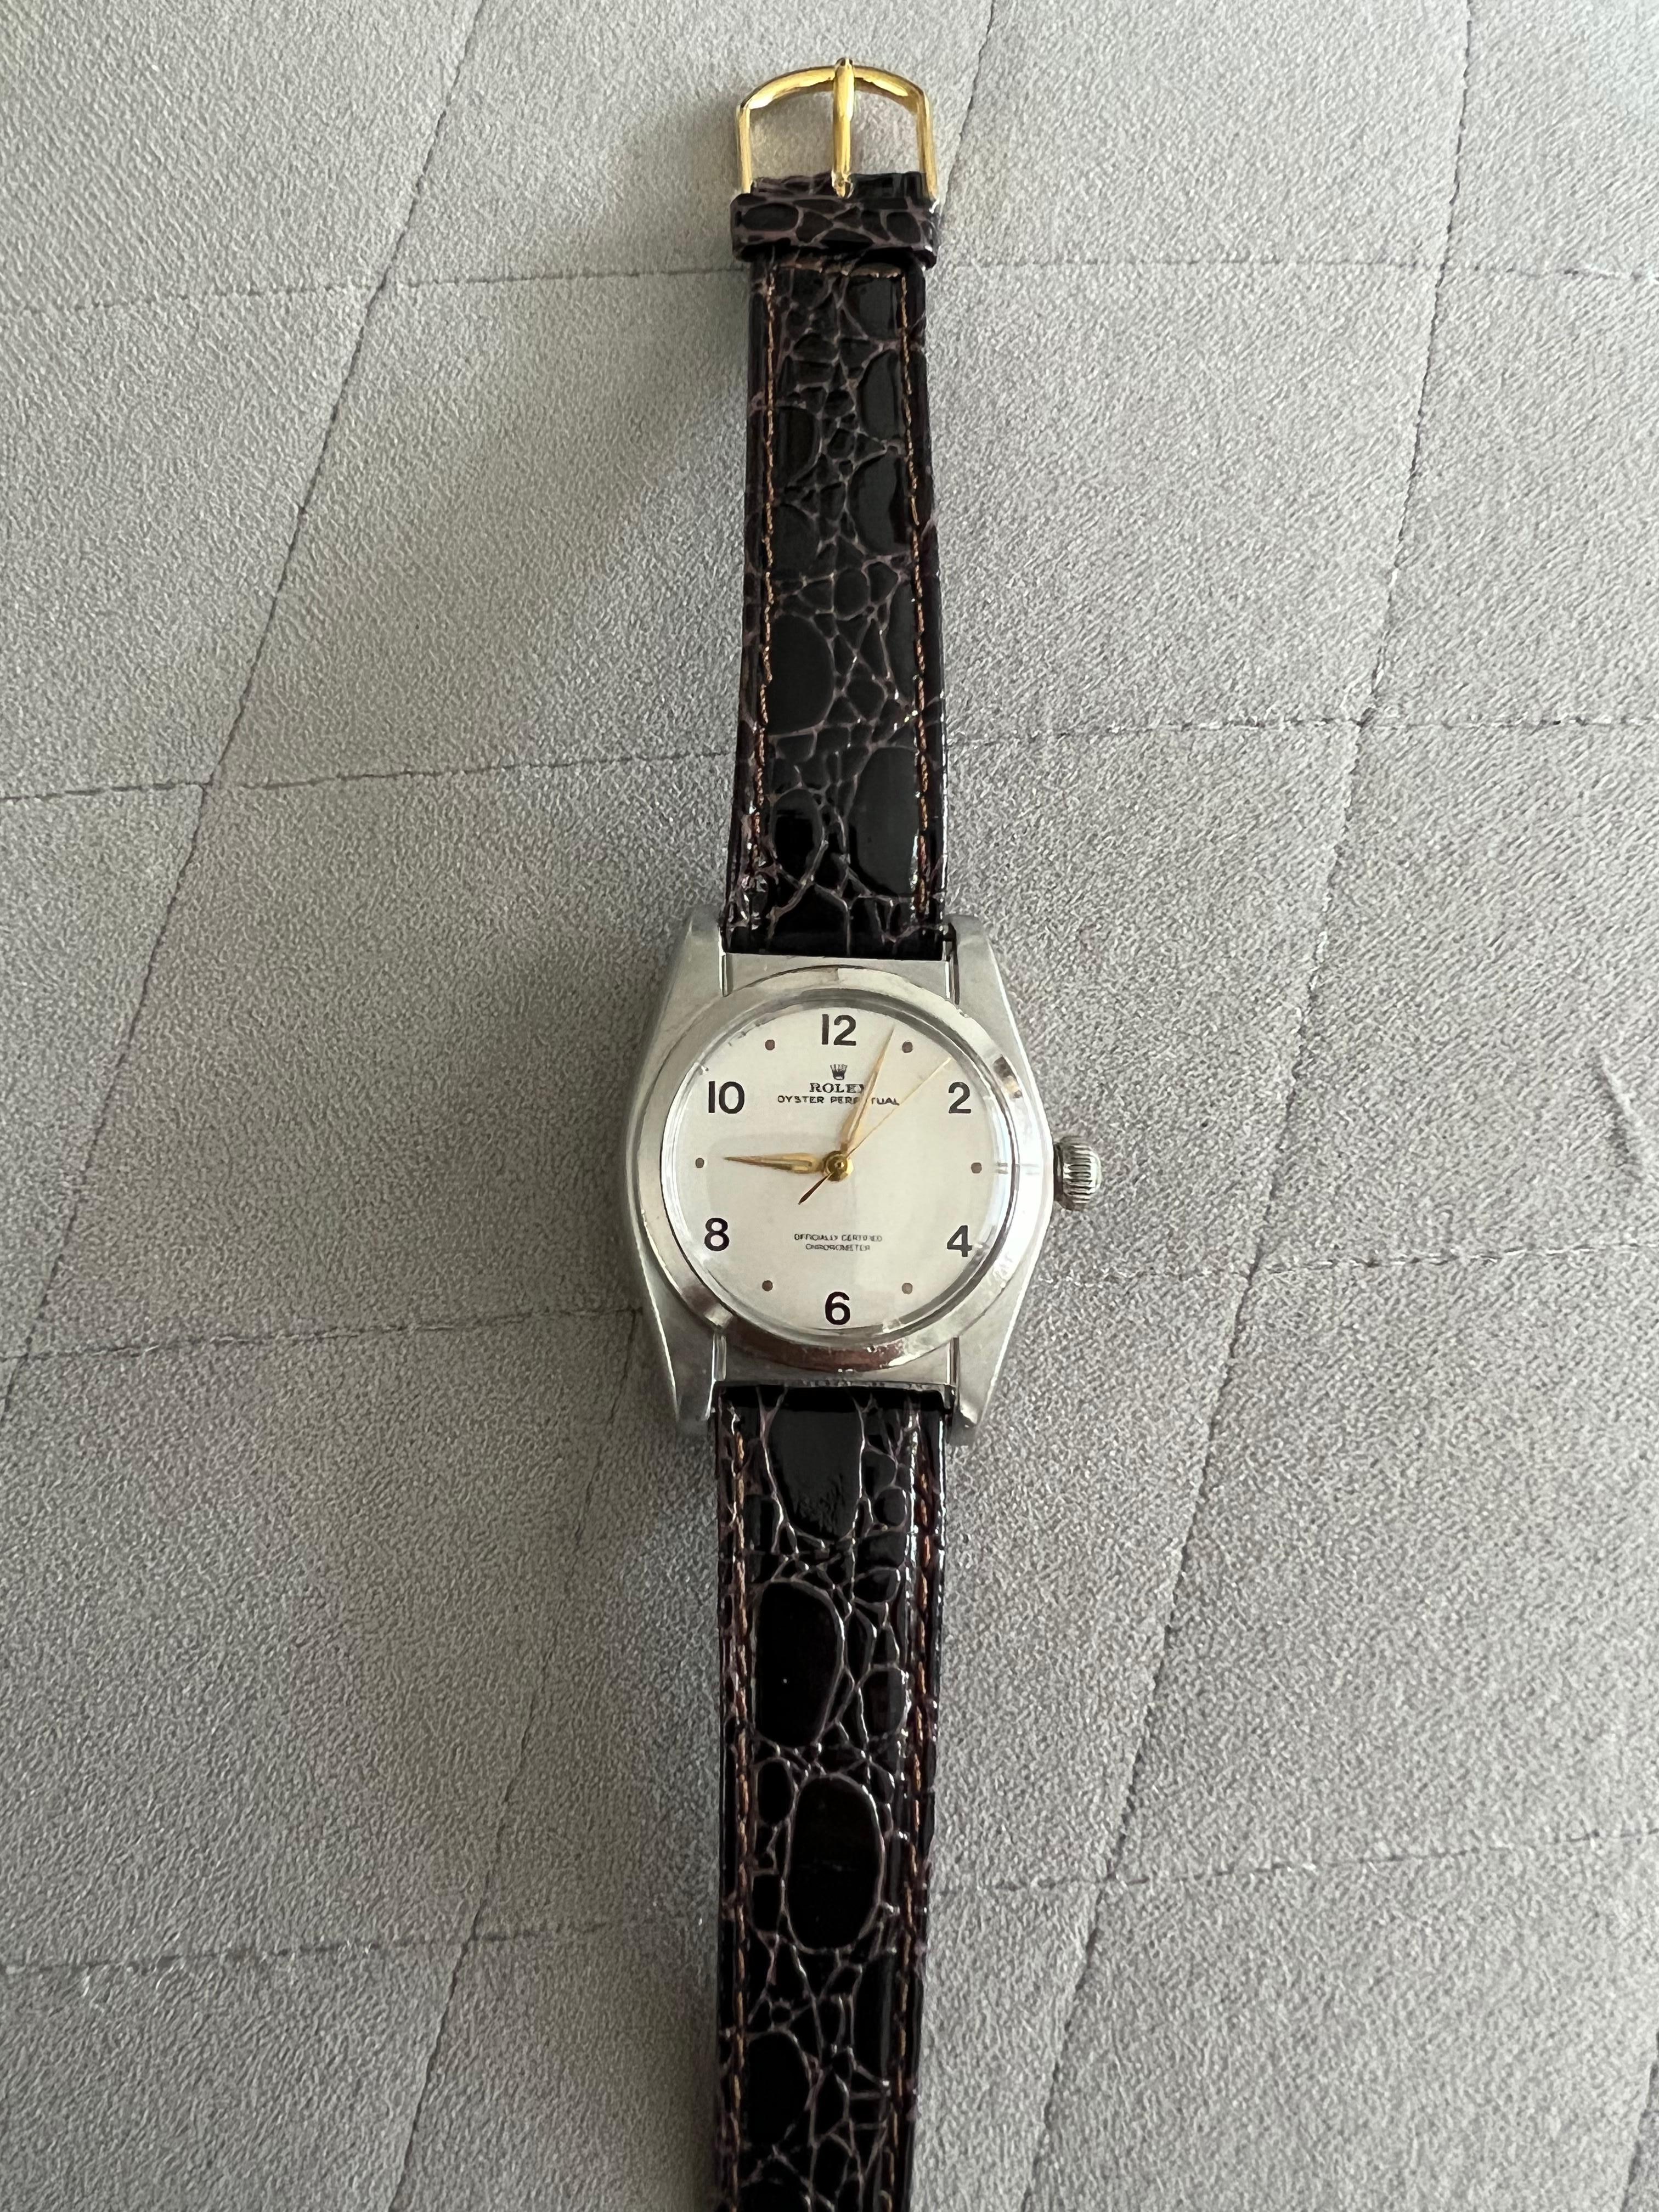 Rare and exciting!! Vintage Rolex bubble back 
This watch, a Reference 6084 Oyster Perpetual dates to approximately 1950s , and is loaded to the hilt with all the goodness you could possibly hope for in a mid-century Rolex. It possesses a